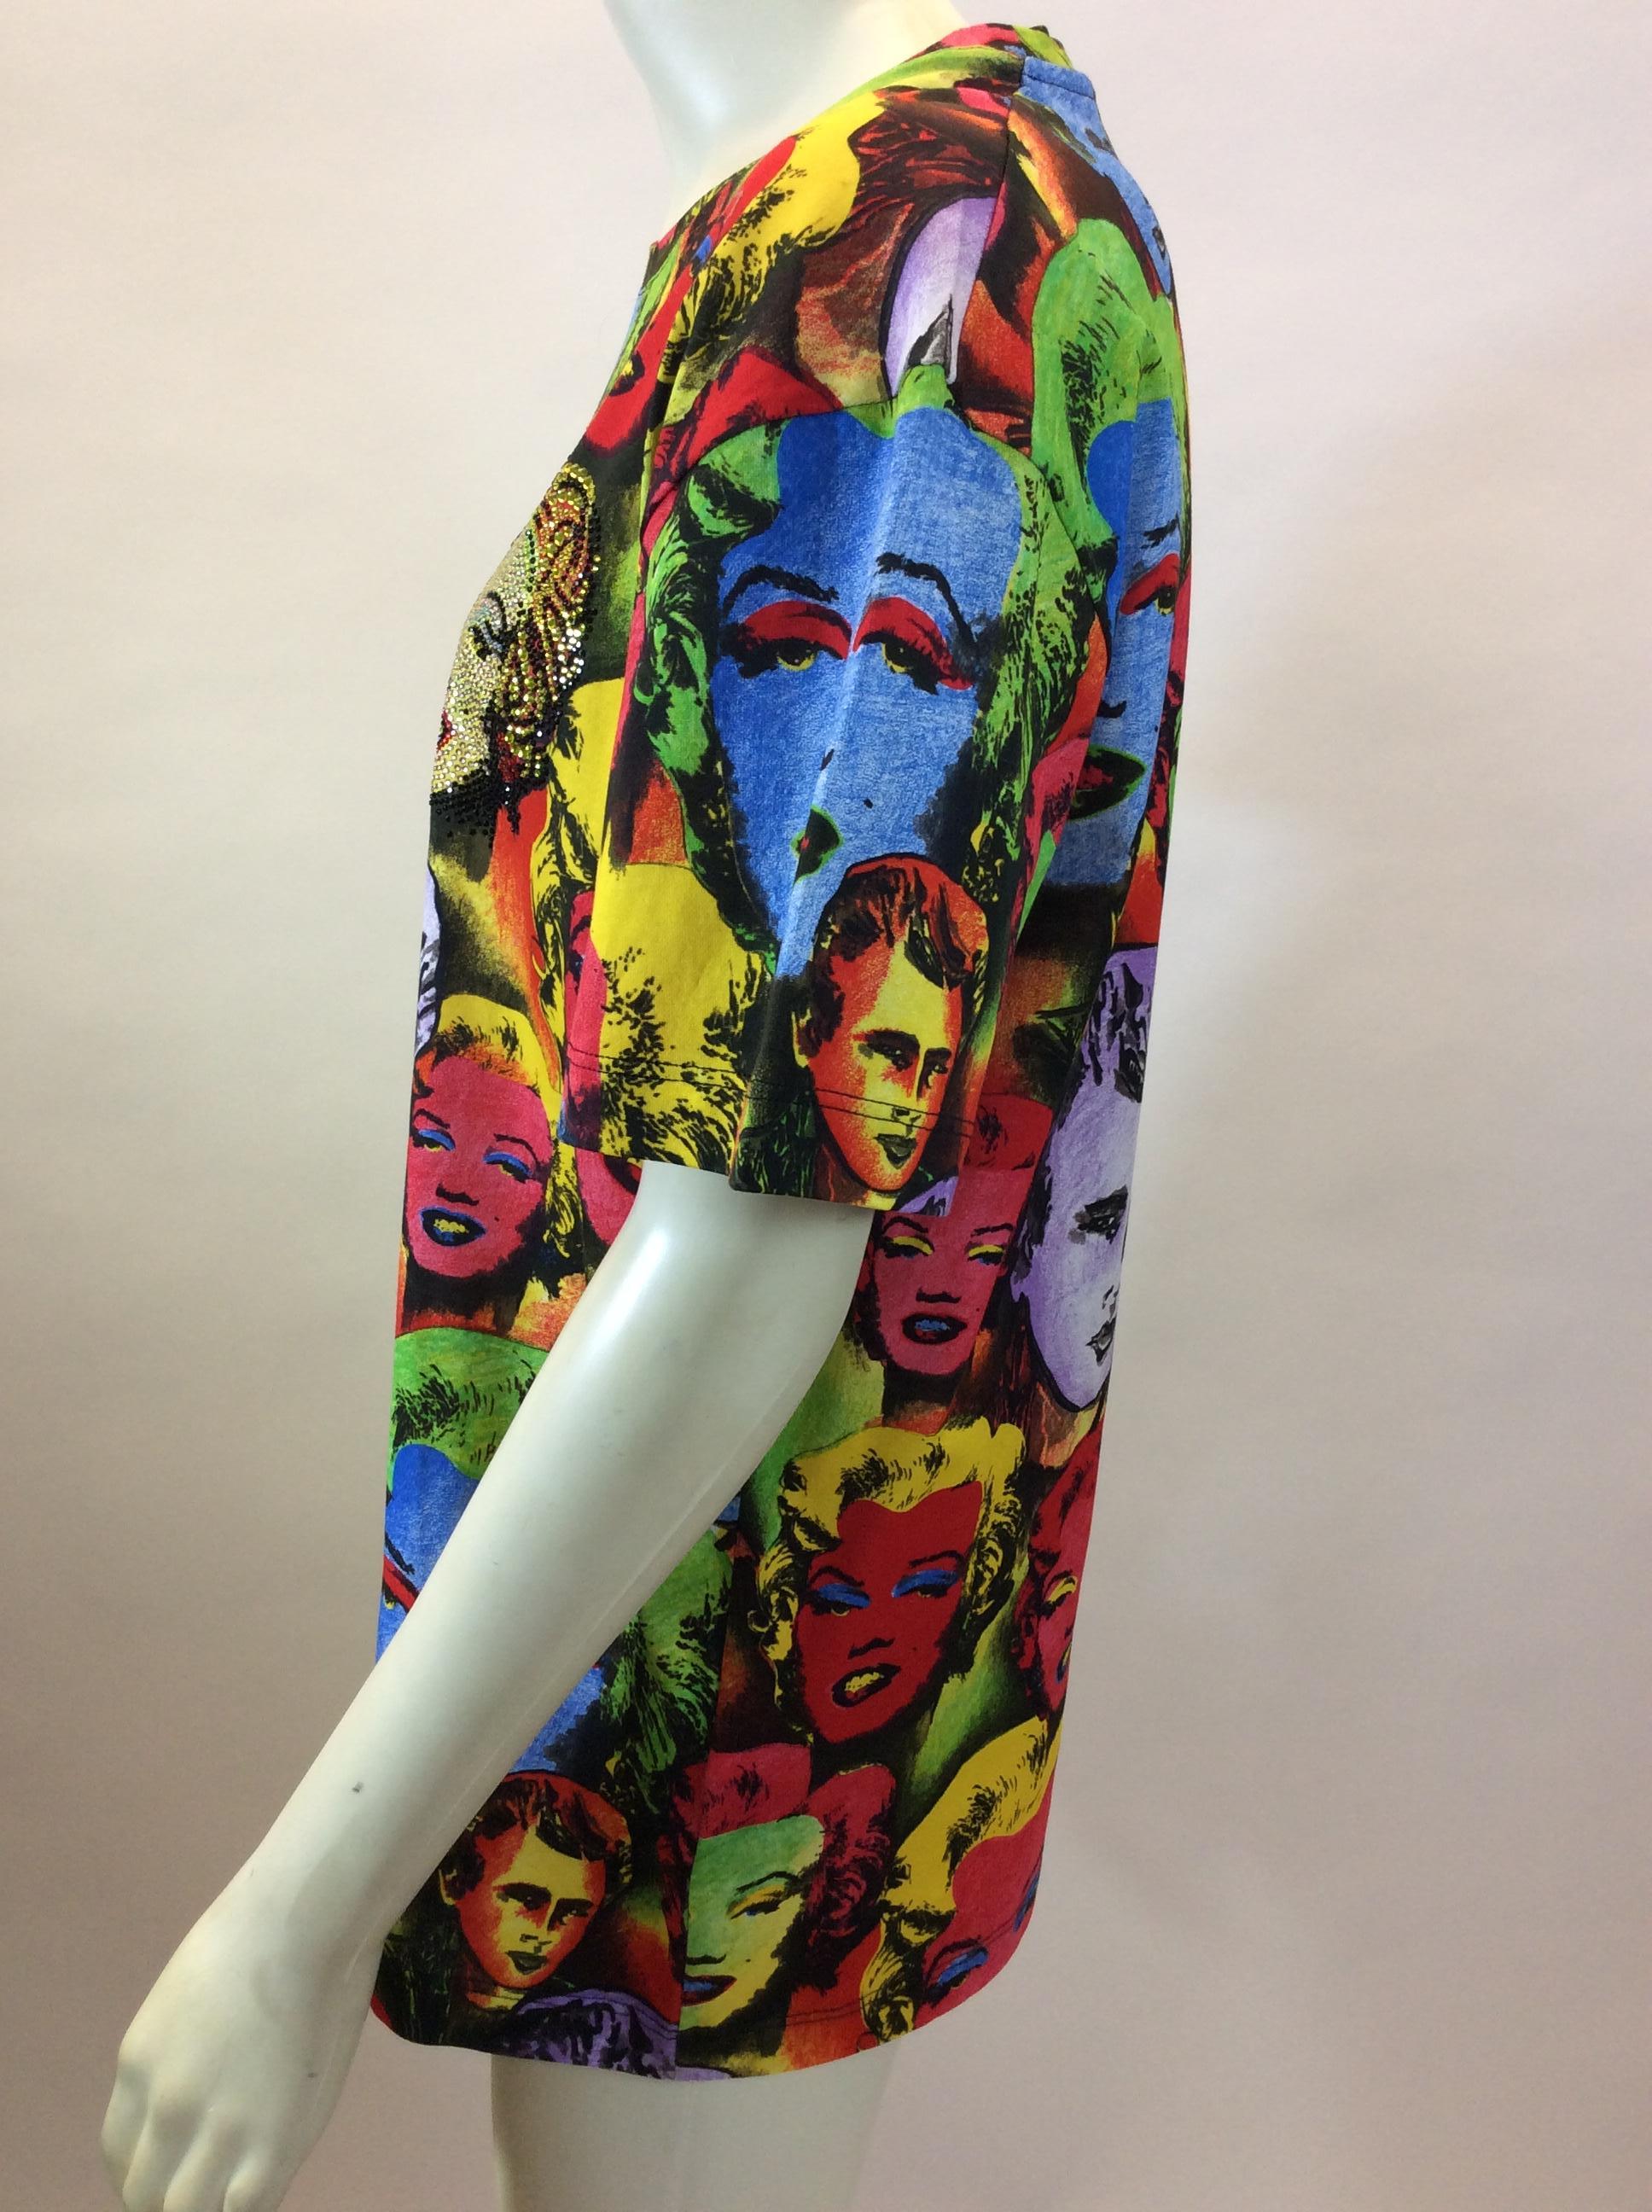 Versace Limited Edition Andy Warhol Tribute Shirt
$399
Made in Italy
100% Cotton
Size Small
Length 25